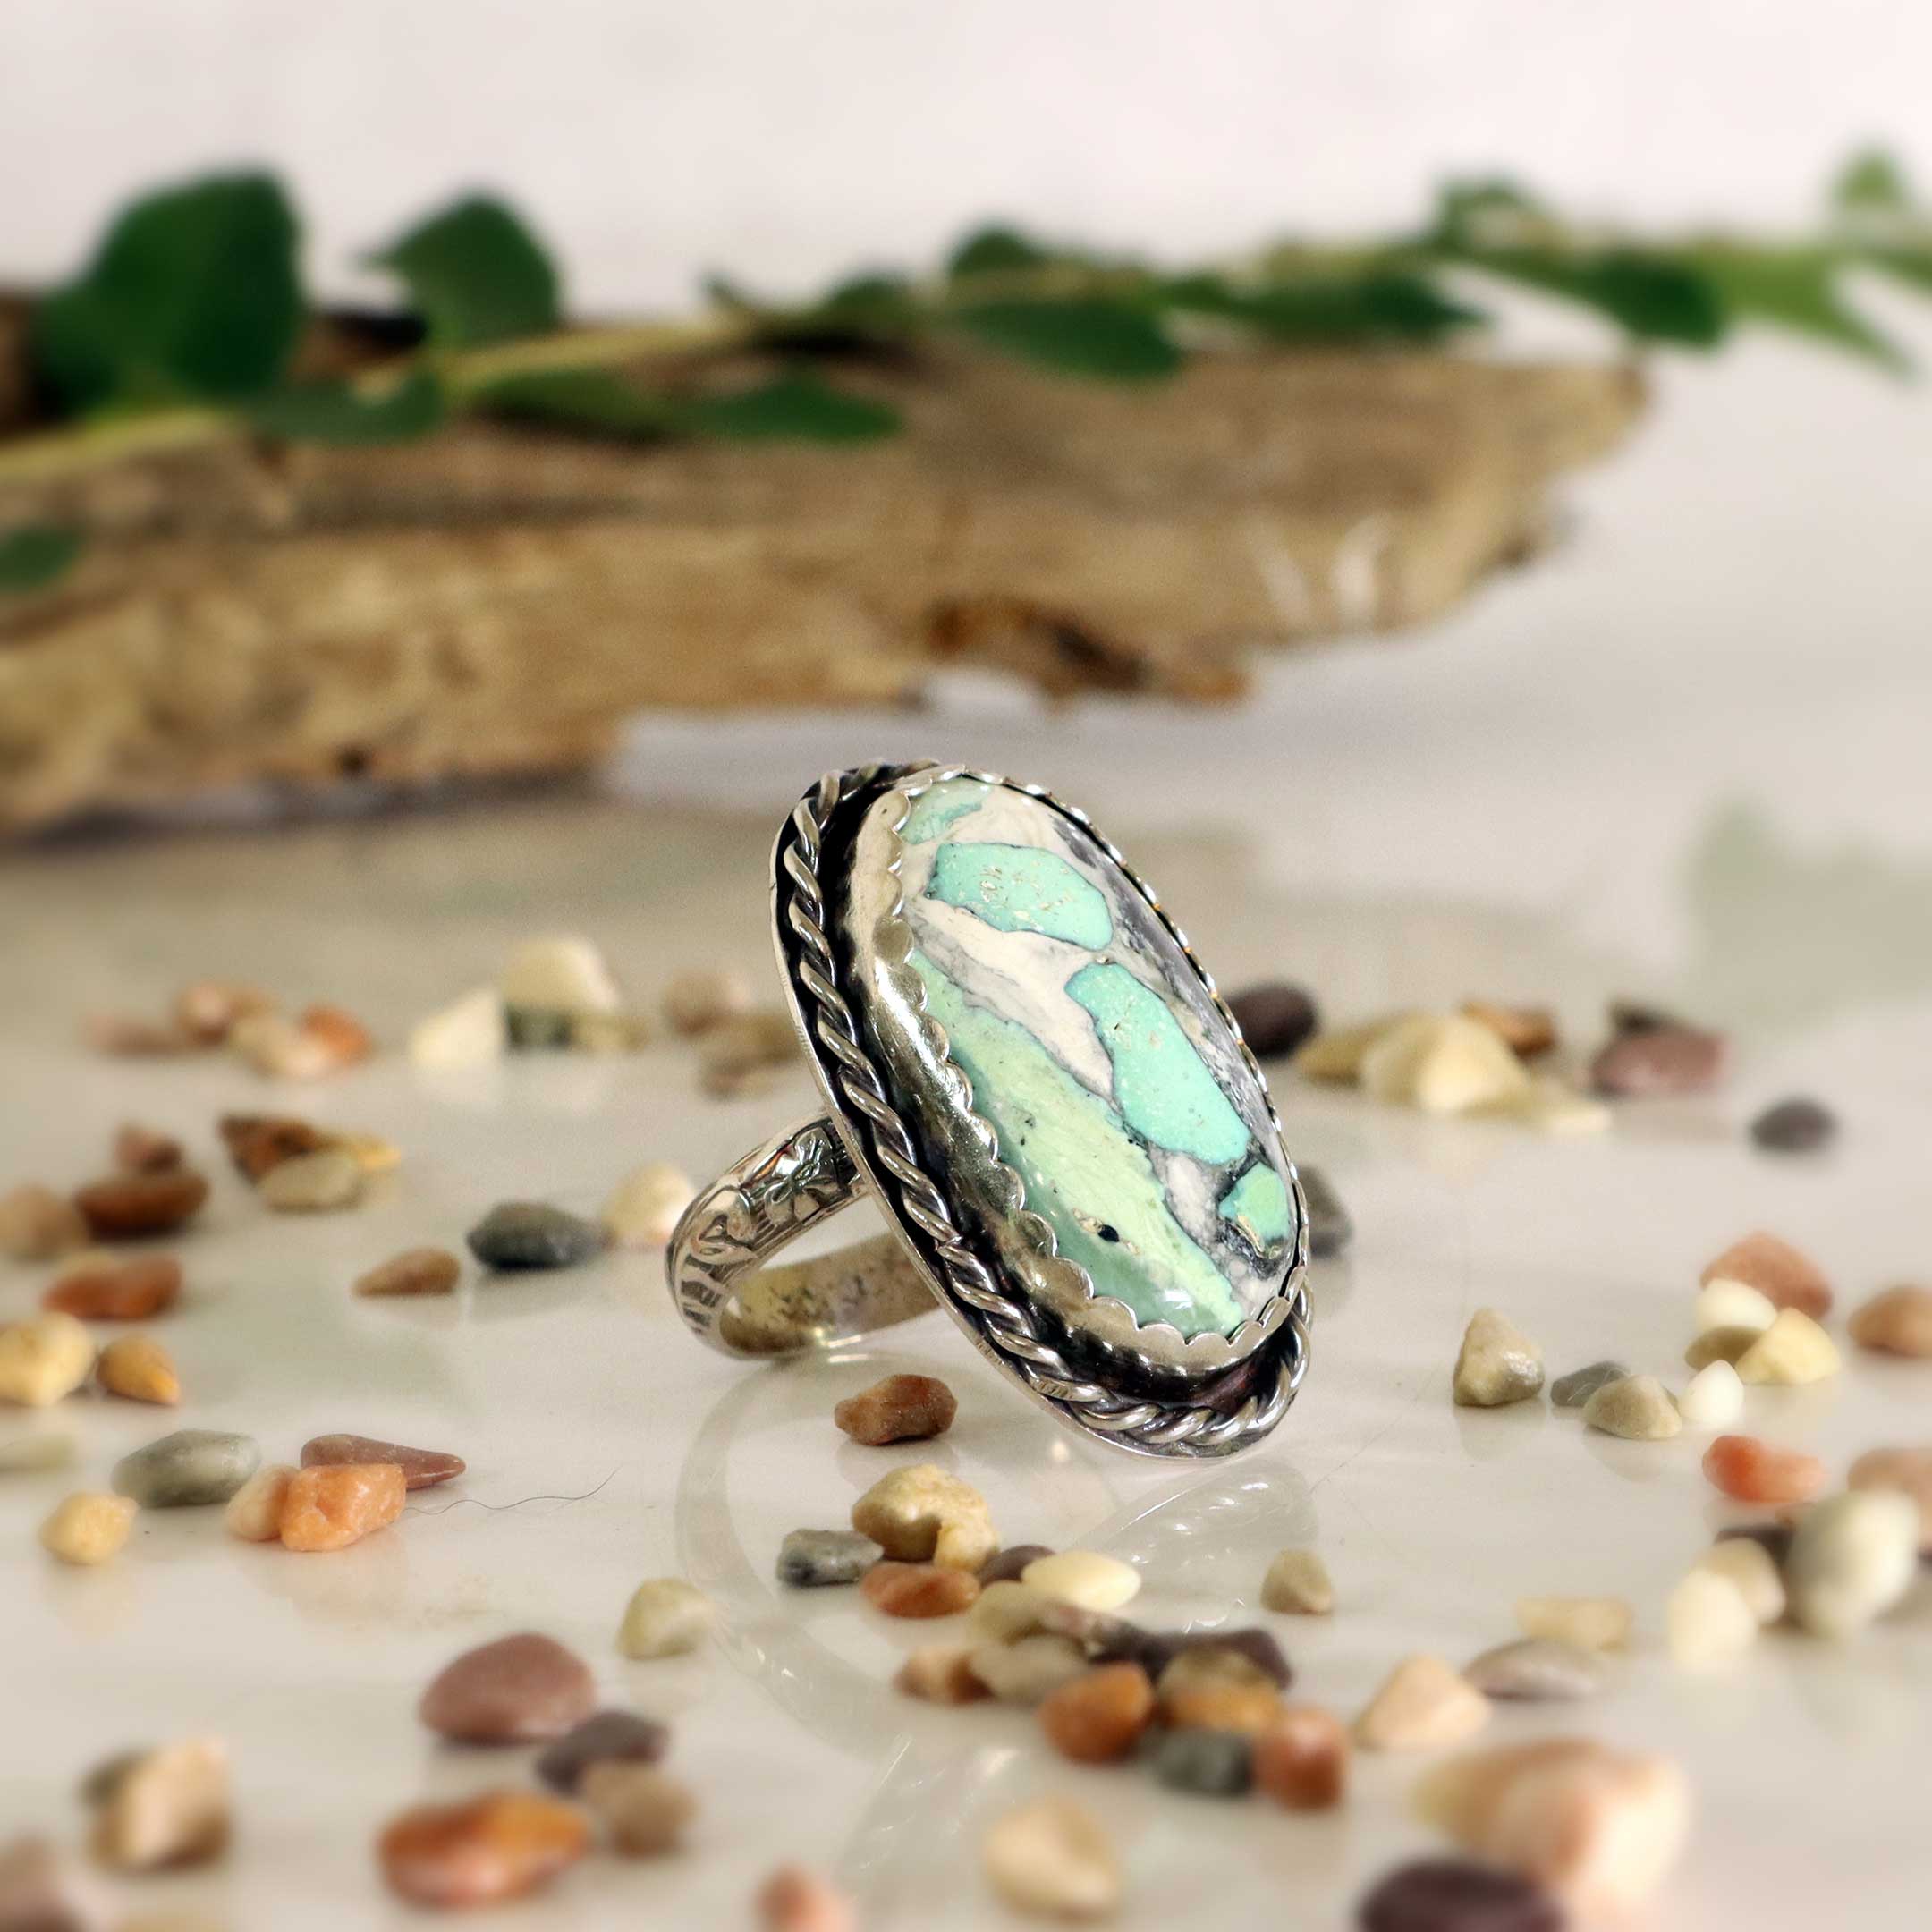 Turquoise / Variscite Ring in Swirls of Mint Green and Grey